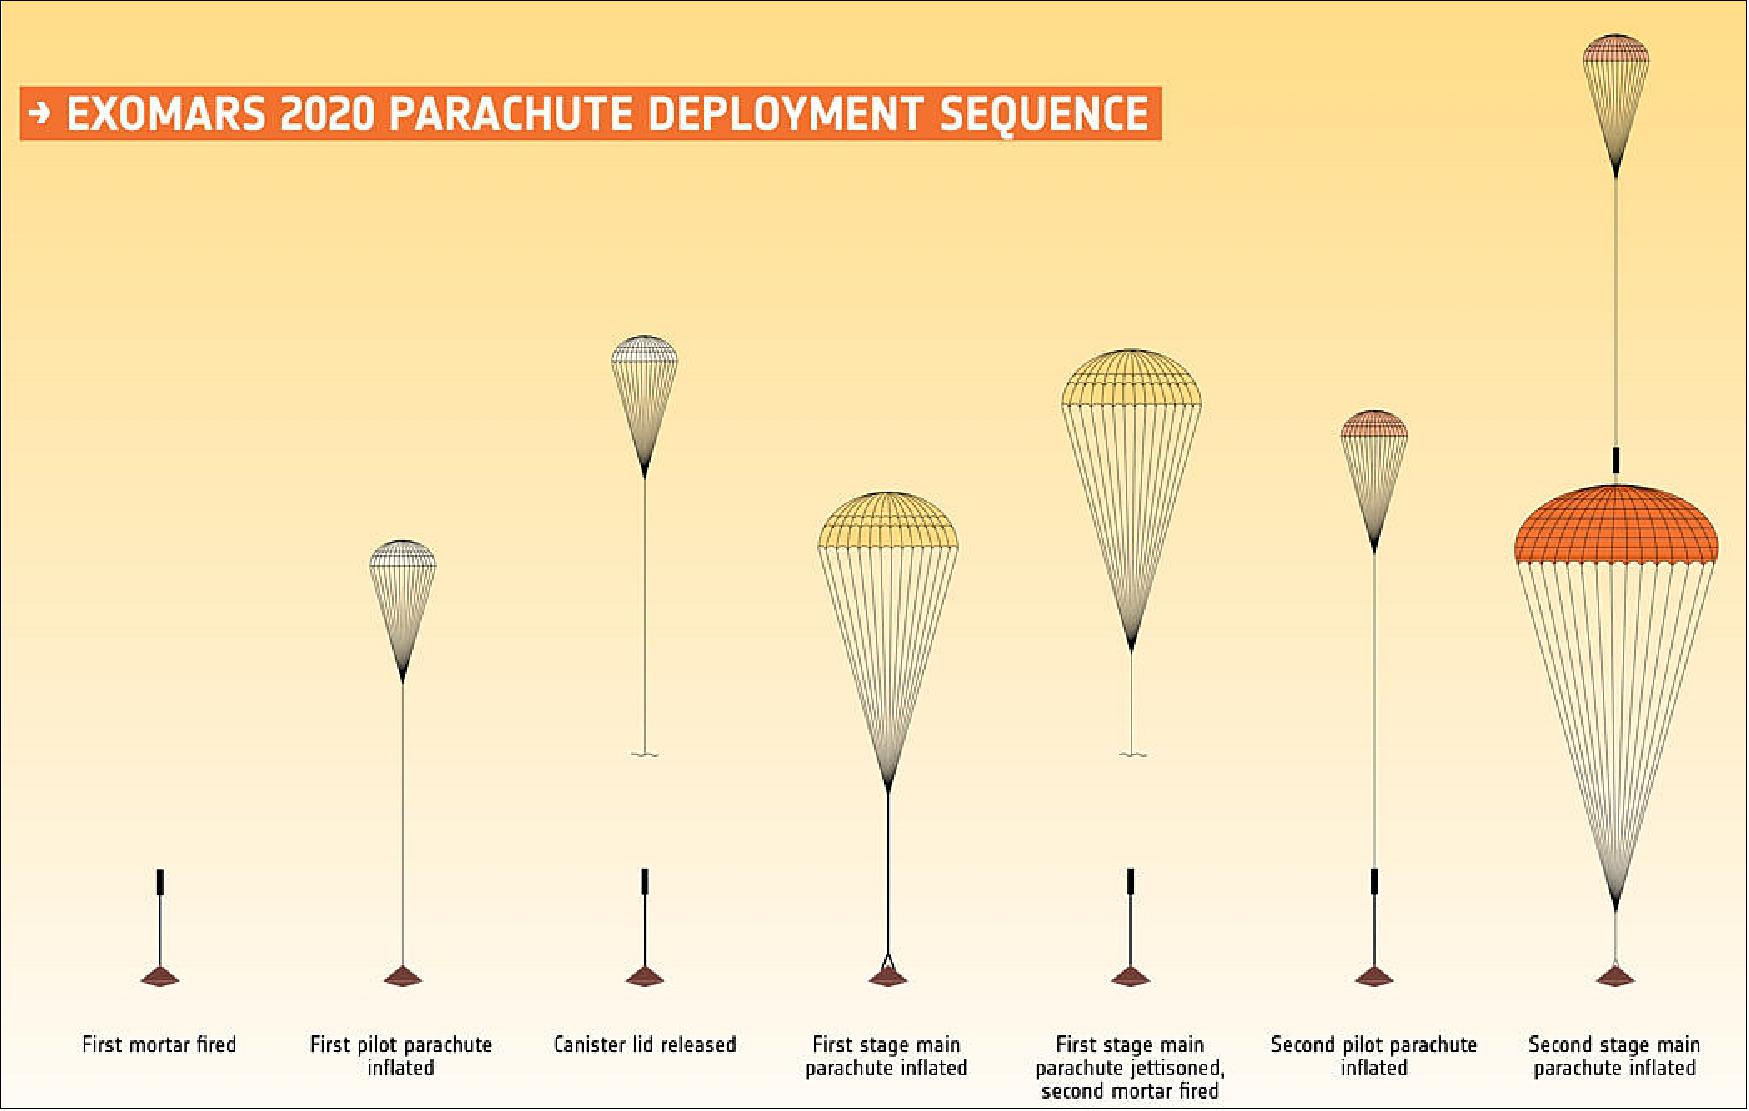 Figure 94: The ExoMars 2020 parachute deployment sequence that will deliver a surface platform and rover to the surface of Mars in 2021 (following launch in 2020). The graphic is not to scale, and the colors of the parachutes are for illustrative purposes only (image credit: ESA) 83)